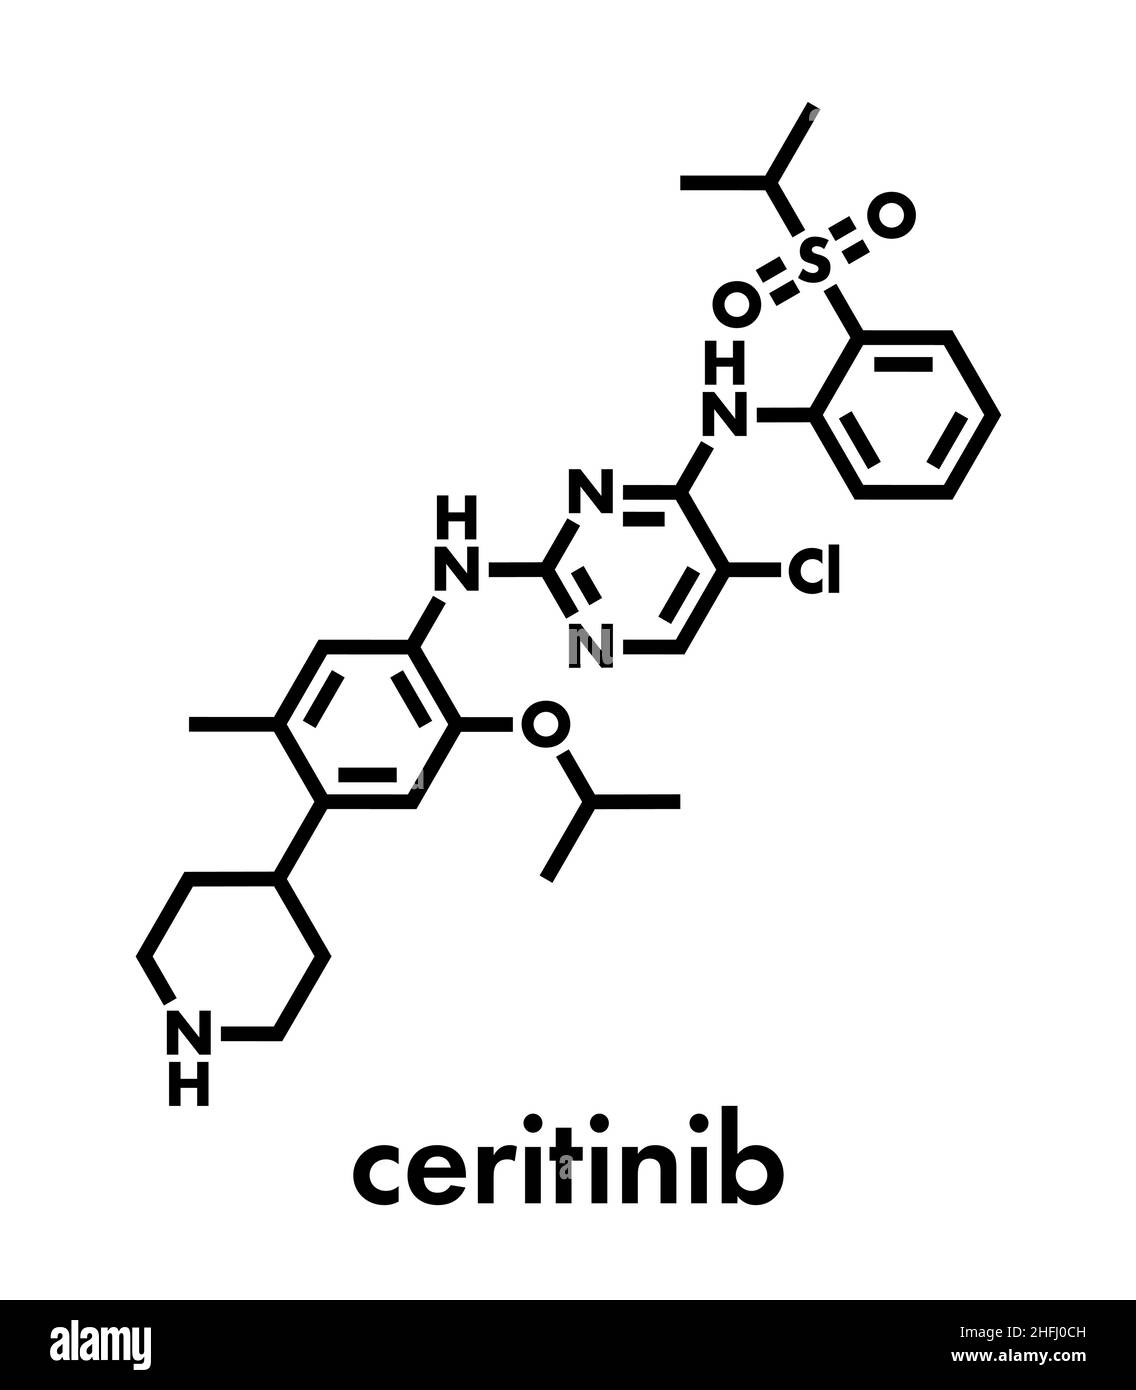 Ceritinib cancer drug molecule. ALK inhibitor used in treatment of metastatic non-small cell lung cancer. Skeletal formula. Stock Vector